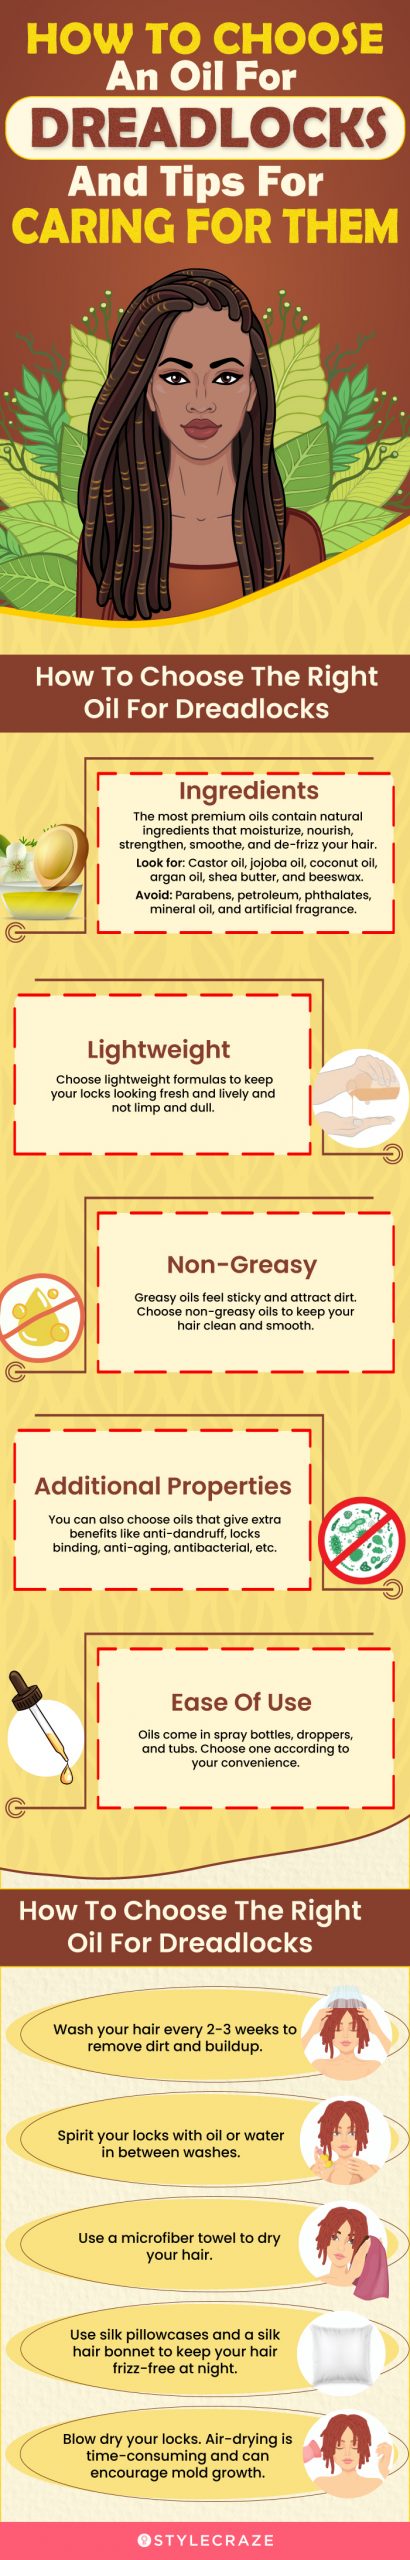 How To Choose An Oil For Dreadlocks (infographic)